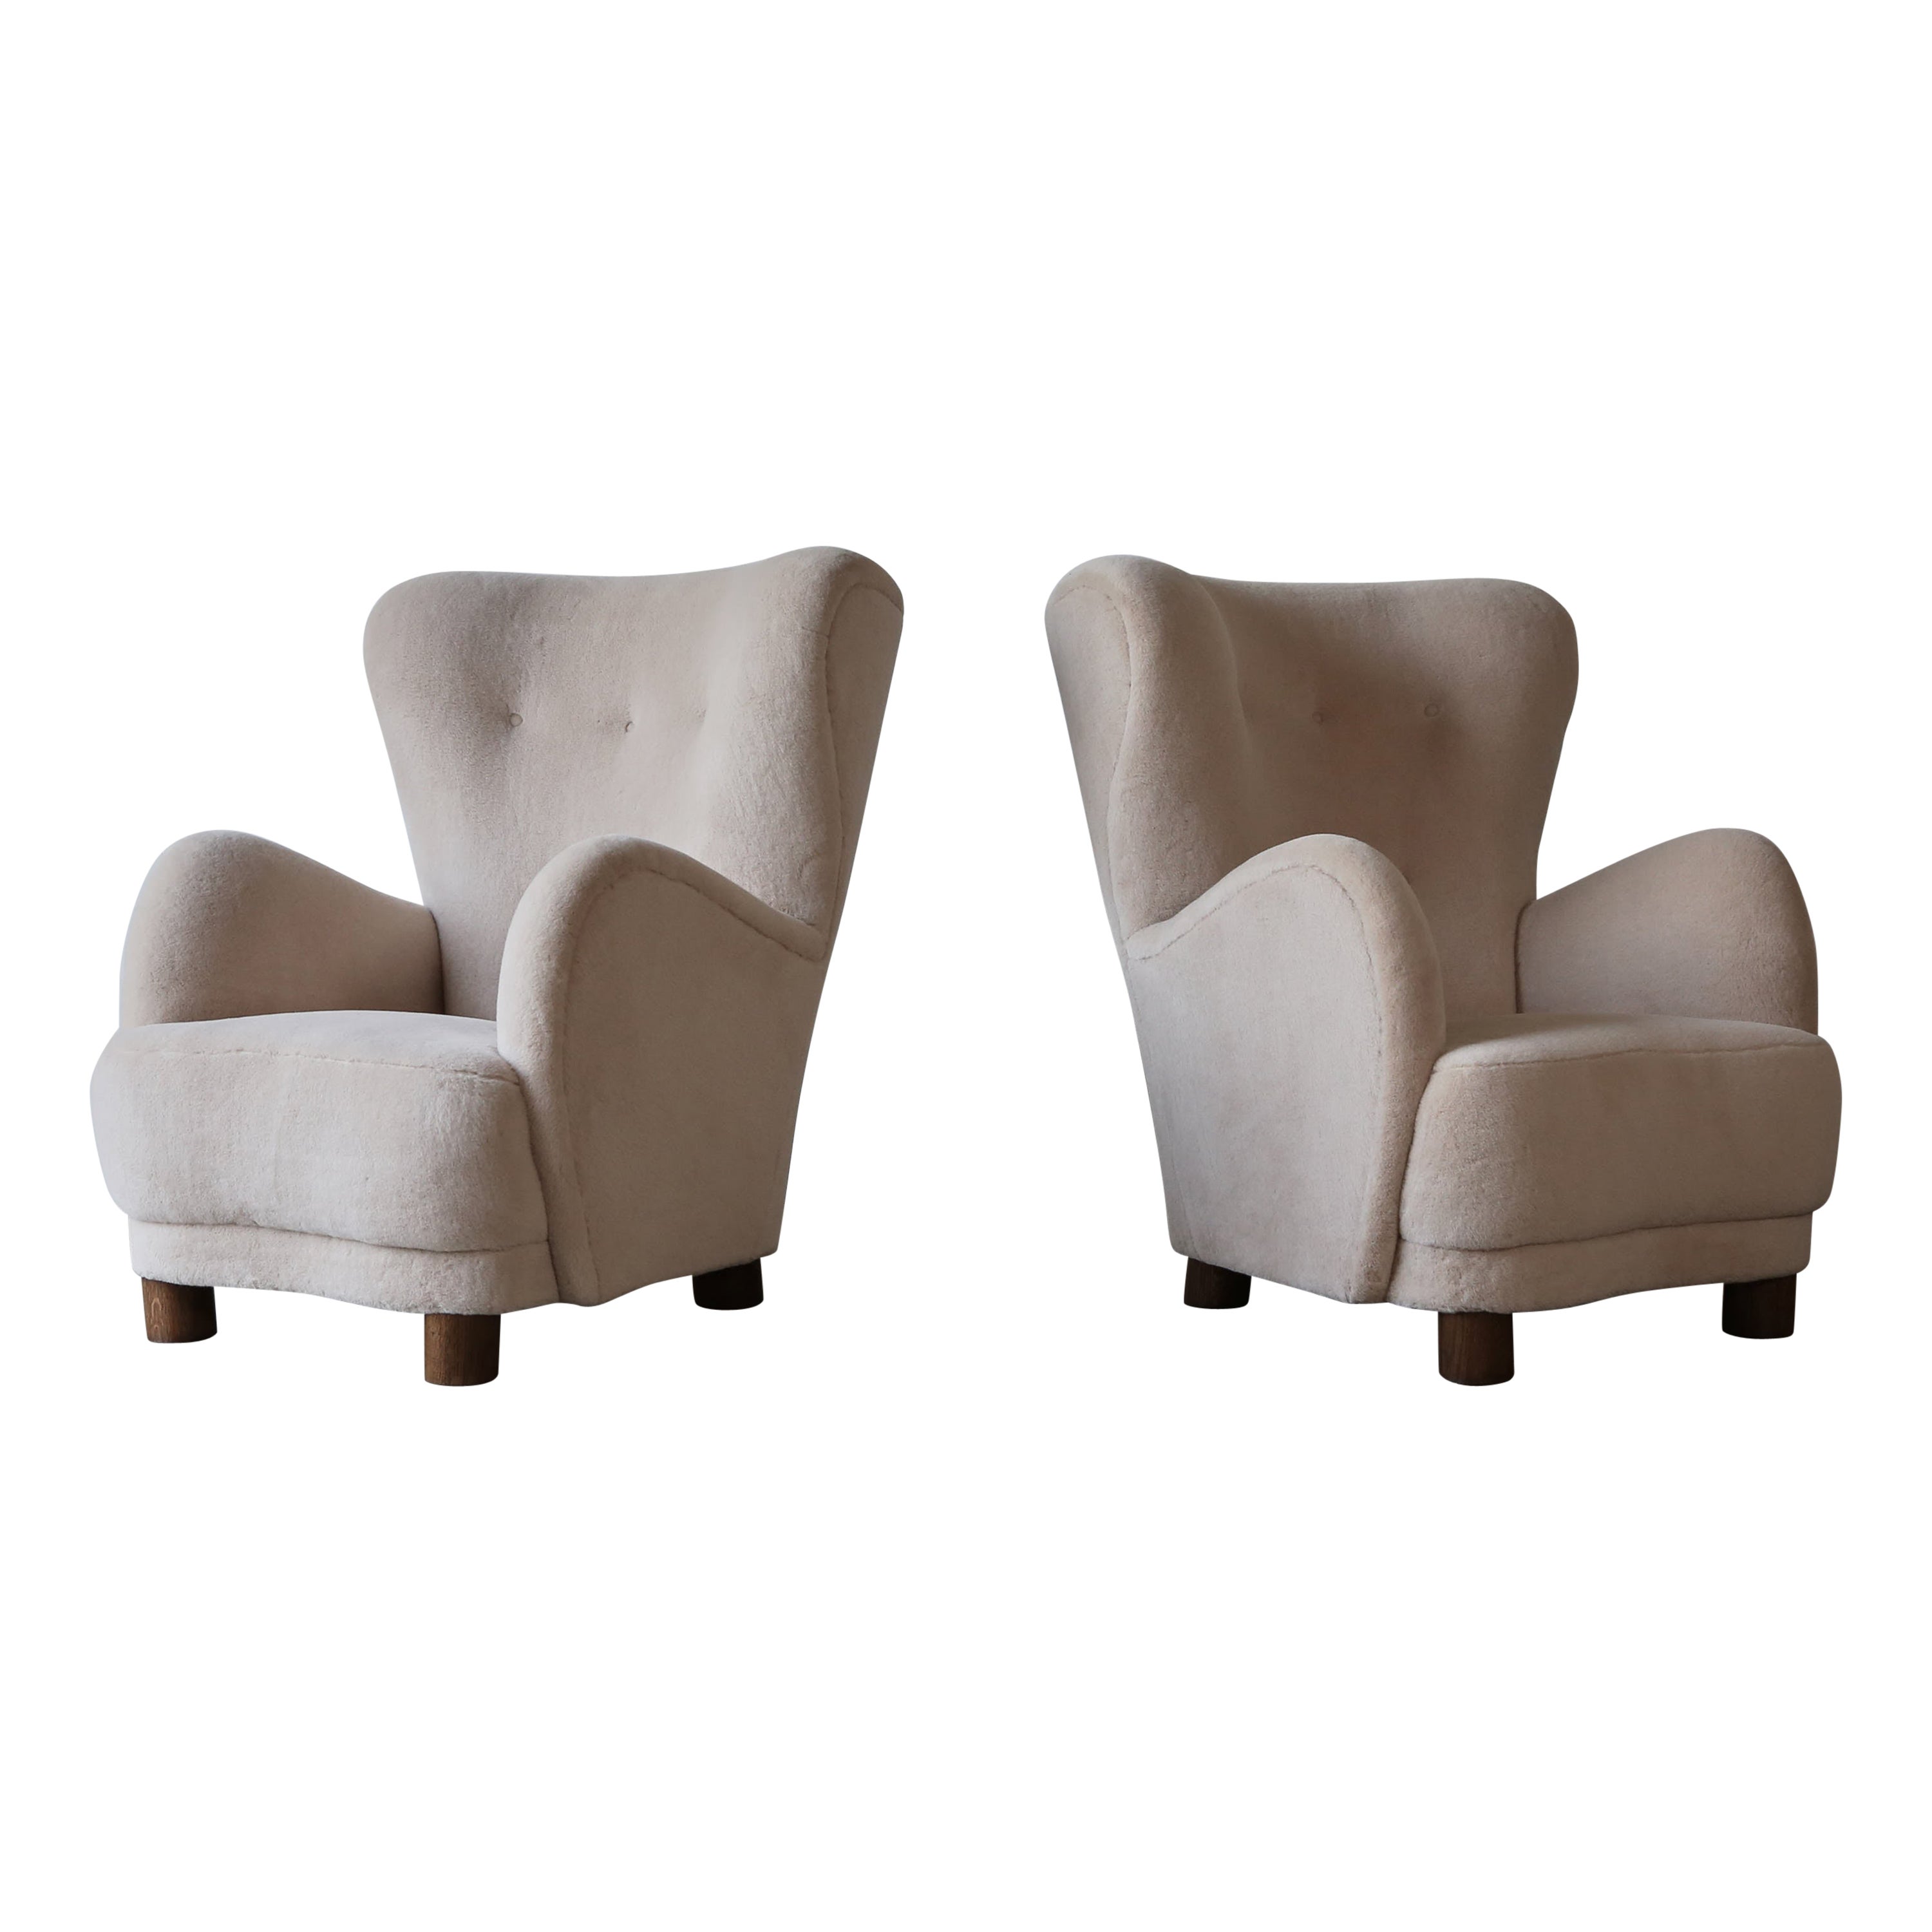 A Pair of High Back Arm Chairs, Upholstered in Pure Alpaca For Sale